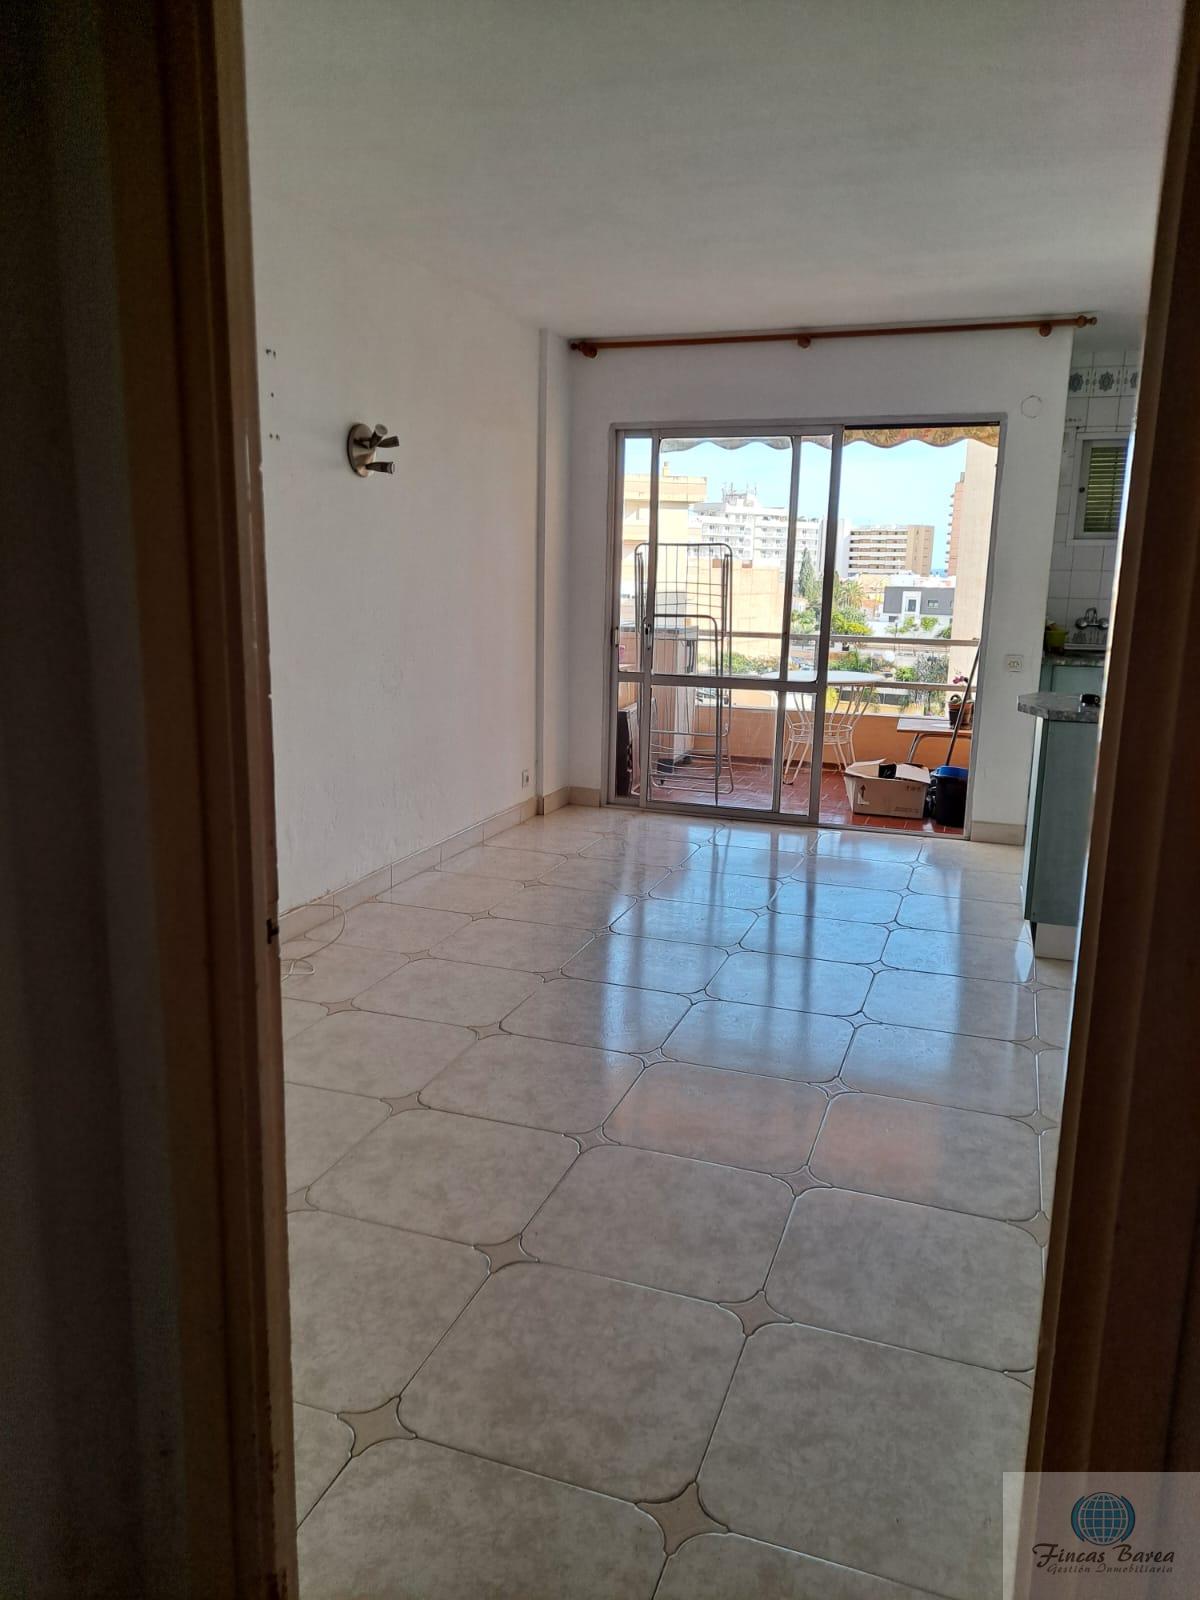 For sale of study in Fuengirola